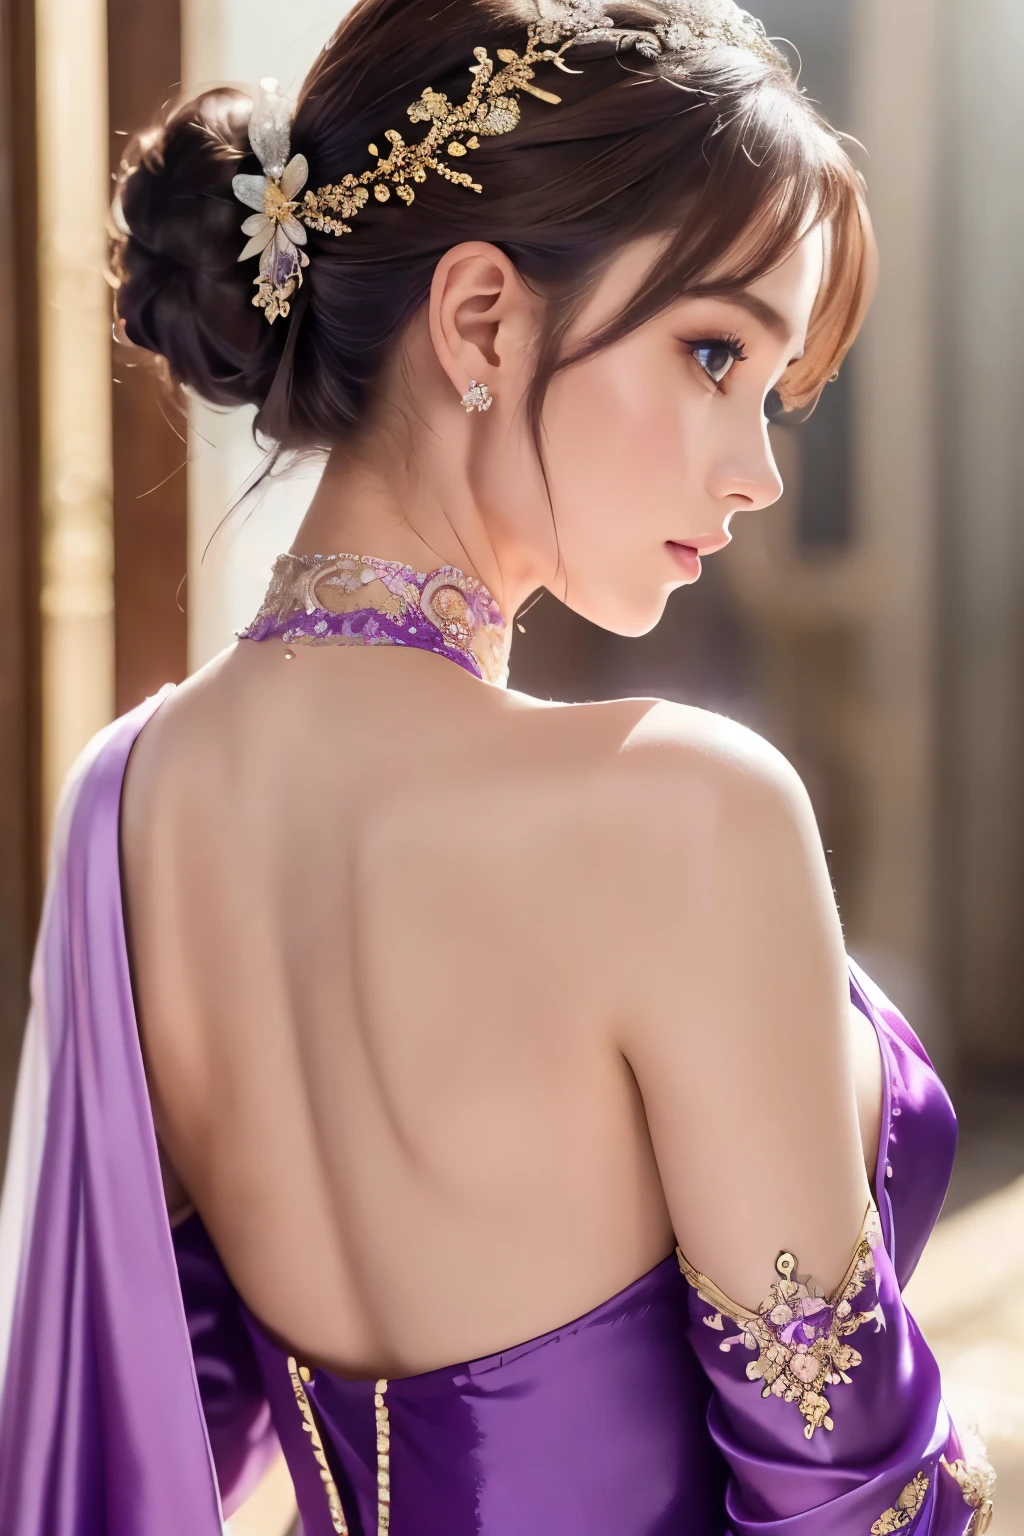 8K、 (Super sexy purple outfit made of shiny silk), Enchanting Girl, Very detailed,Audrey Hepburn, Exquisite decorative details 、Pastel tones 、 Very intricate details 、 Realistic Light,Luxury Bridal Dress,(((sideboob)))、From the side、Elegant cuteness
